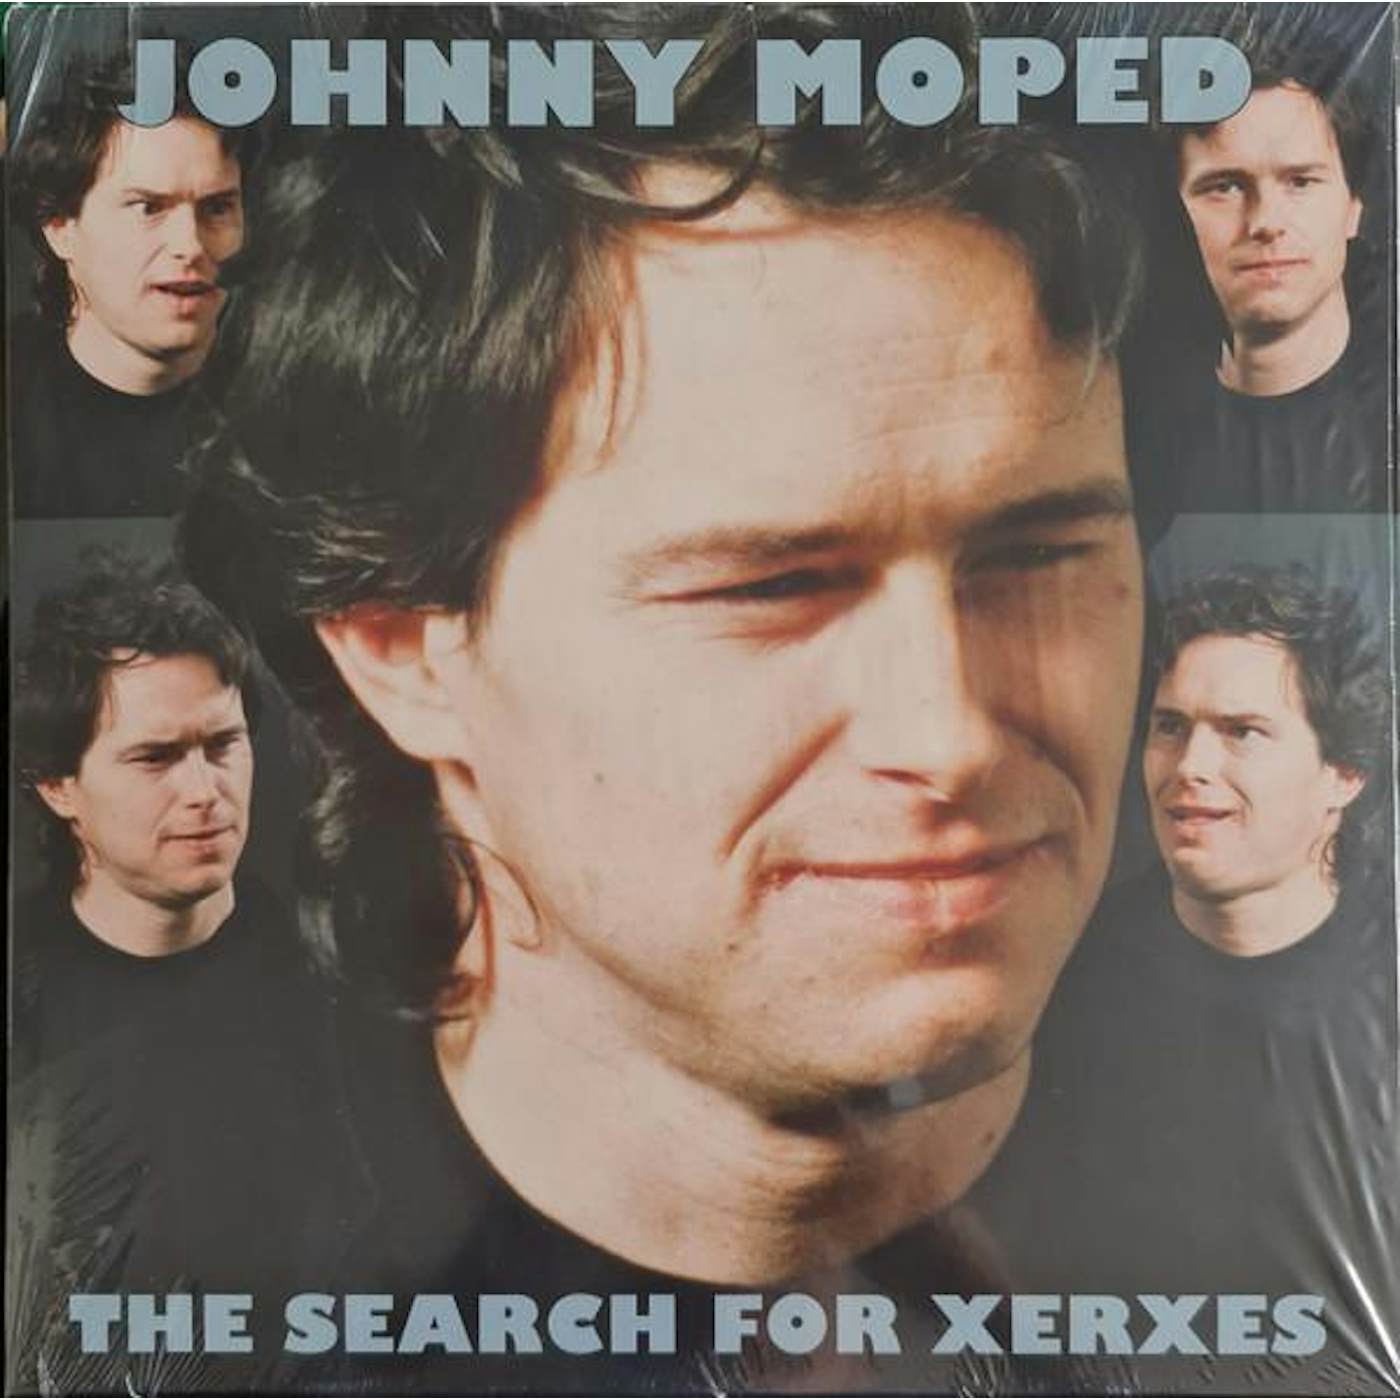 Johnny Moped SEARCH FOR XERXES Vinyl Record